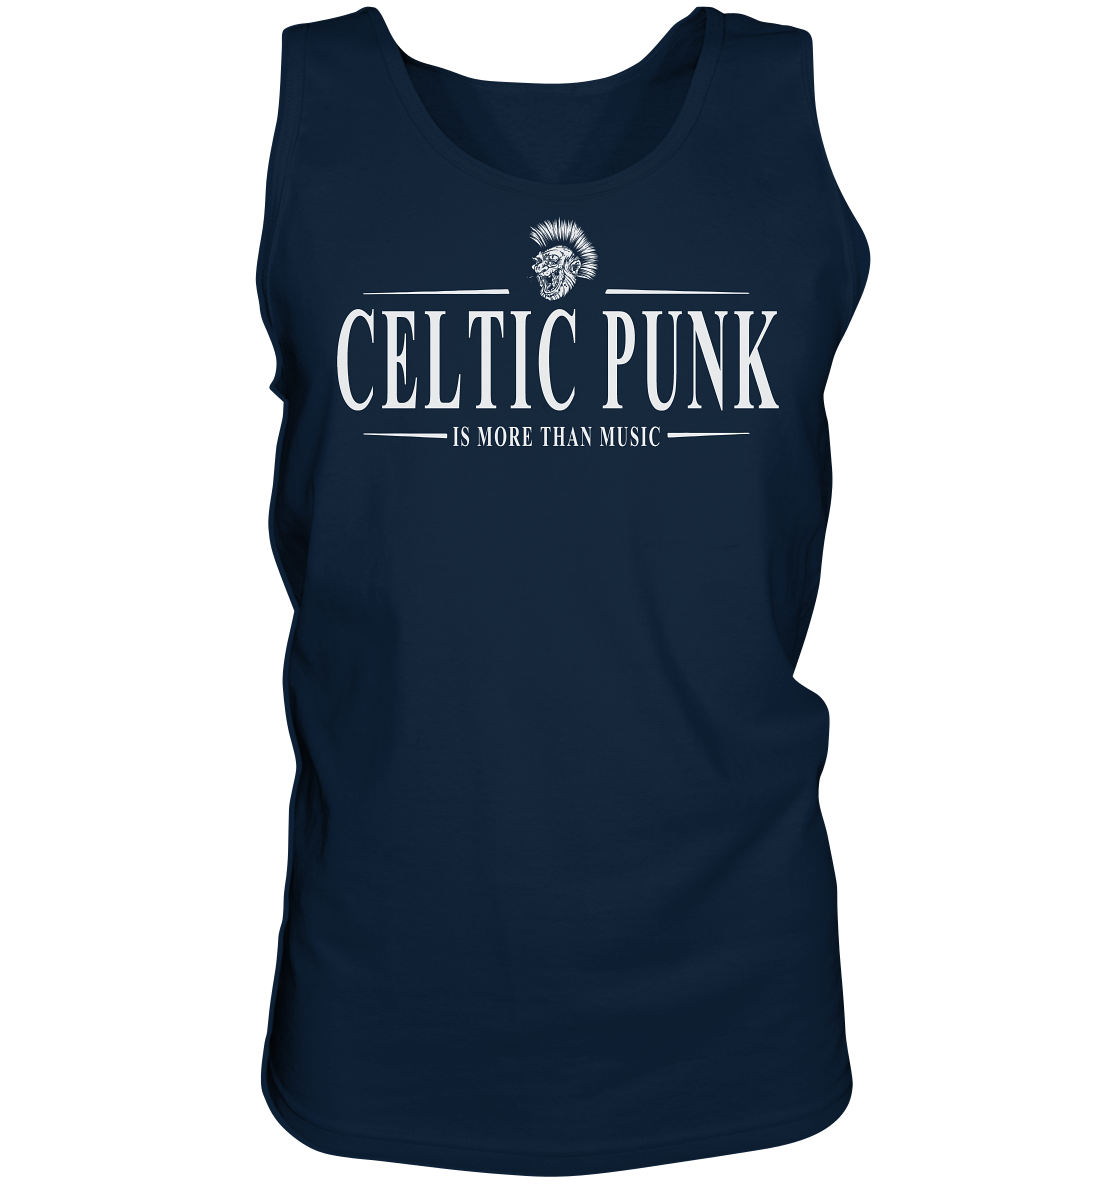 Celtic Punk "Is More Than Music" - Tank-Top